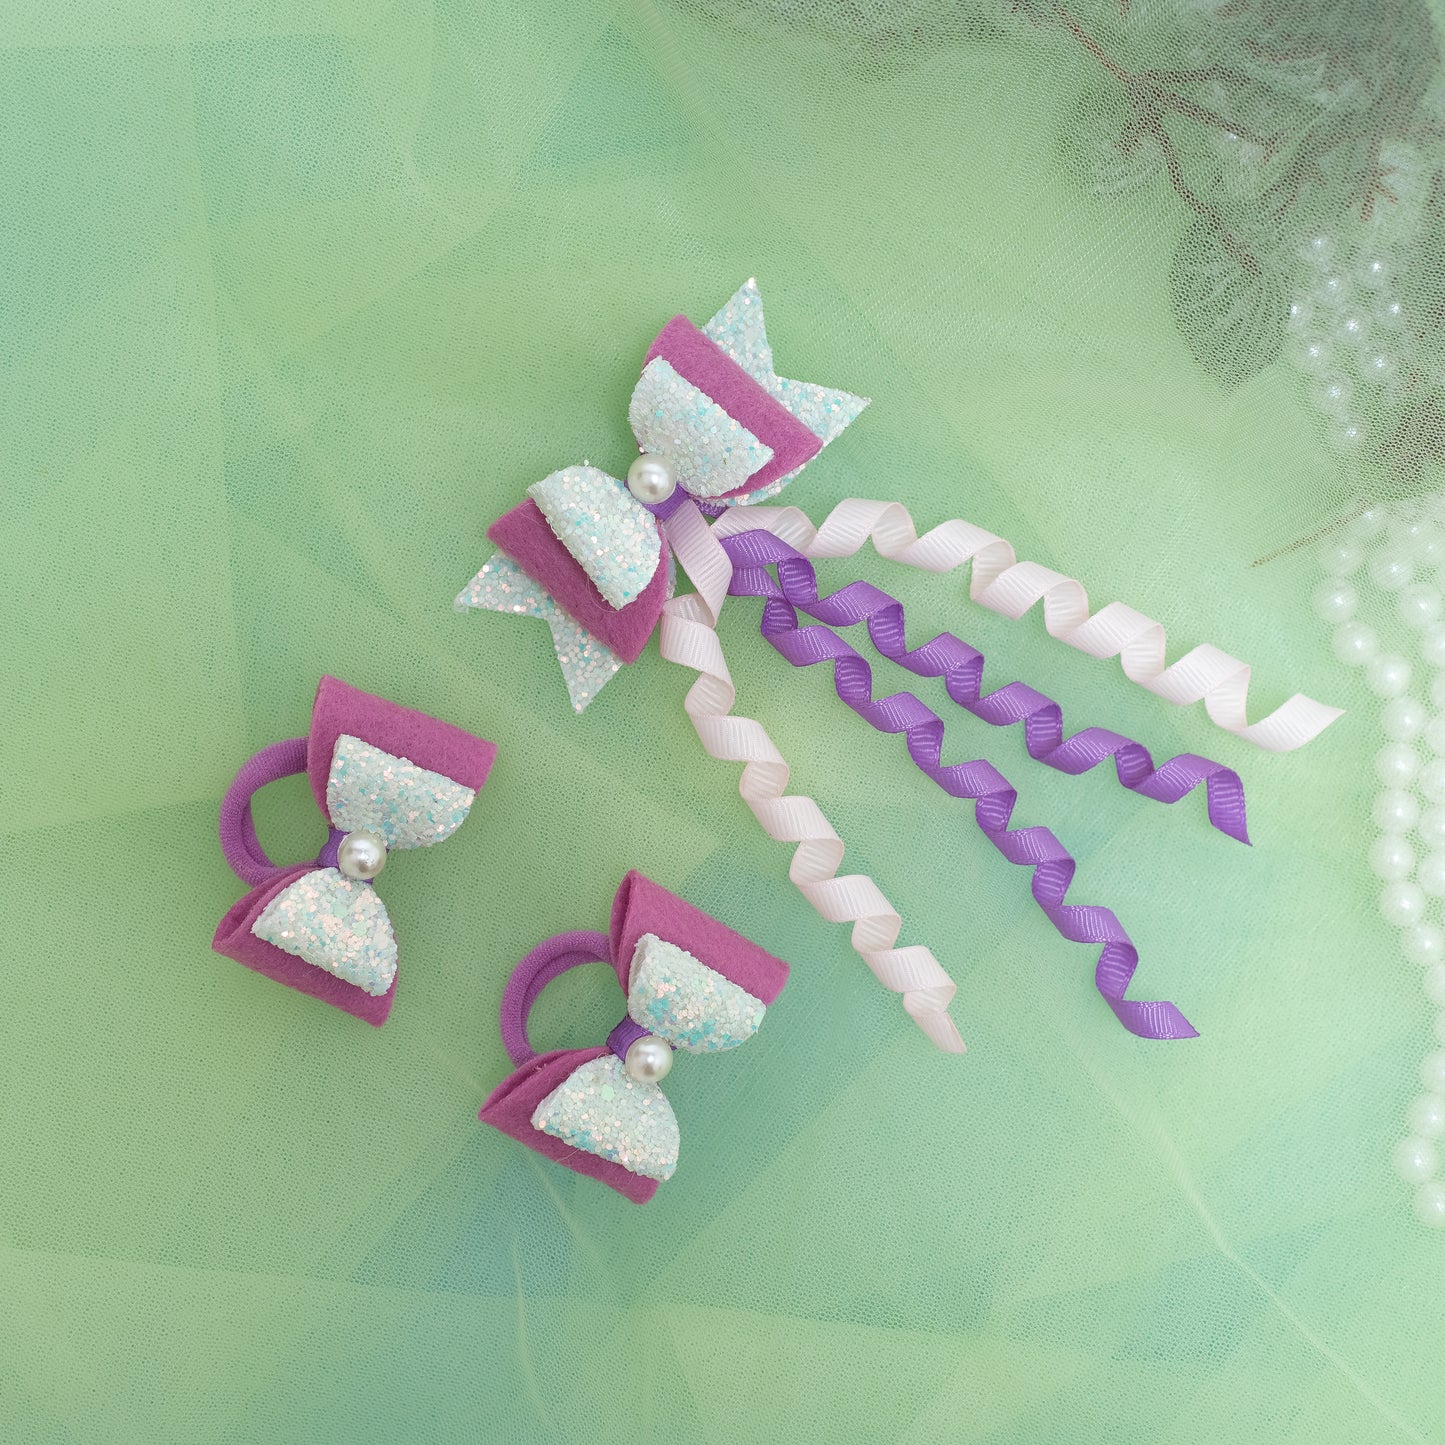 Combo: 1 Dangler Hair-pin and 2 Rubberbands with Fancy Shimmer Bow for Party - Light Blue, Light Pink, Purple